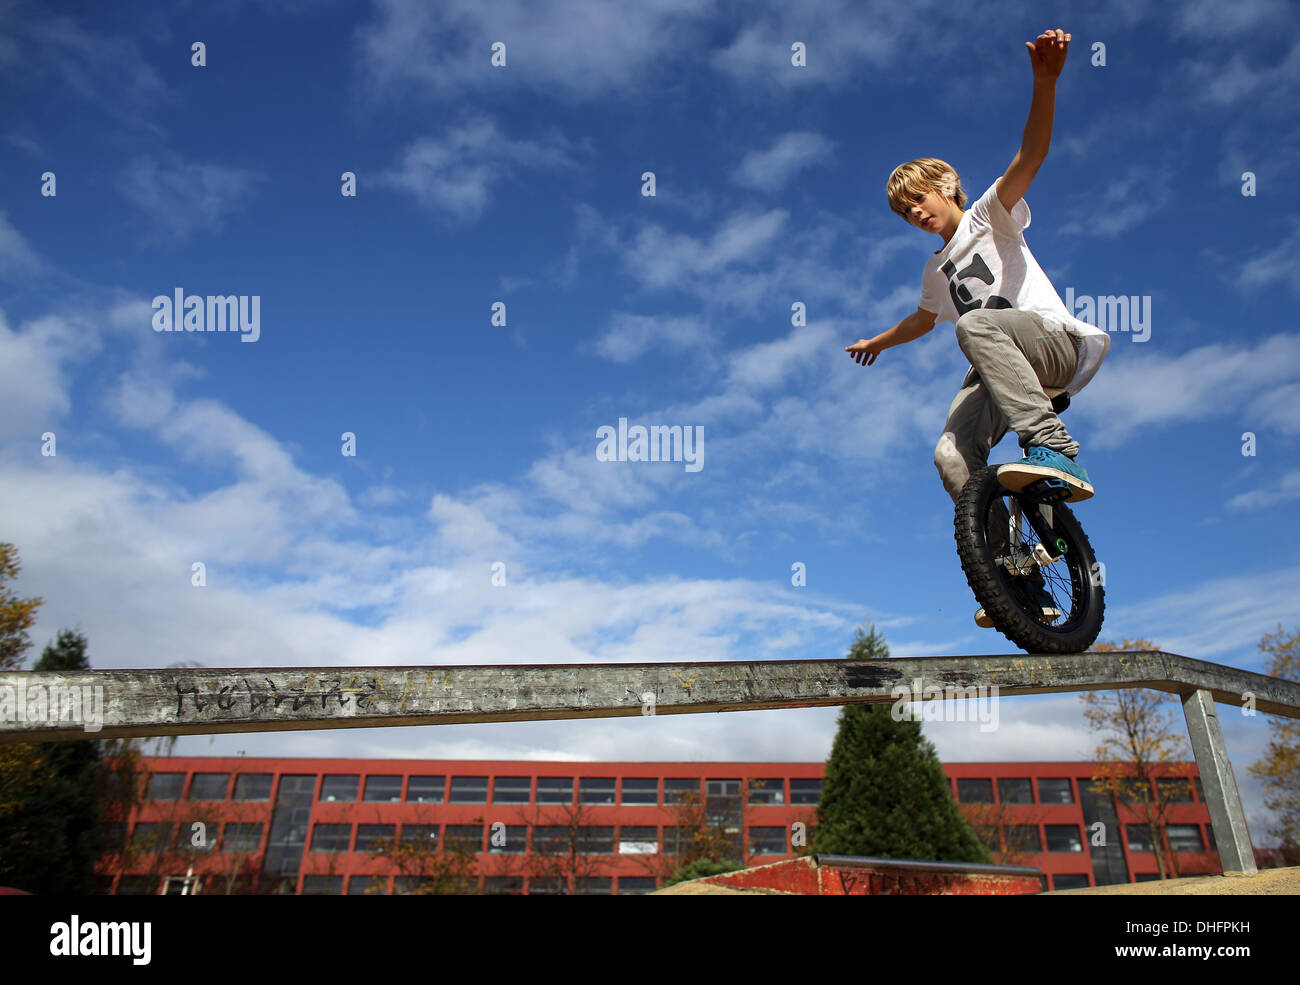 Leipzig, Germany. 24th Oct, 2013. 14 year old Mimo Valentin Seedler from  Leipzig drives on a bar with his unicycle across in Leipzig, Germany, 24  October 2013. Last year, Seedler, who took